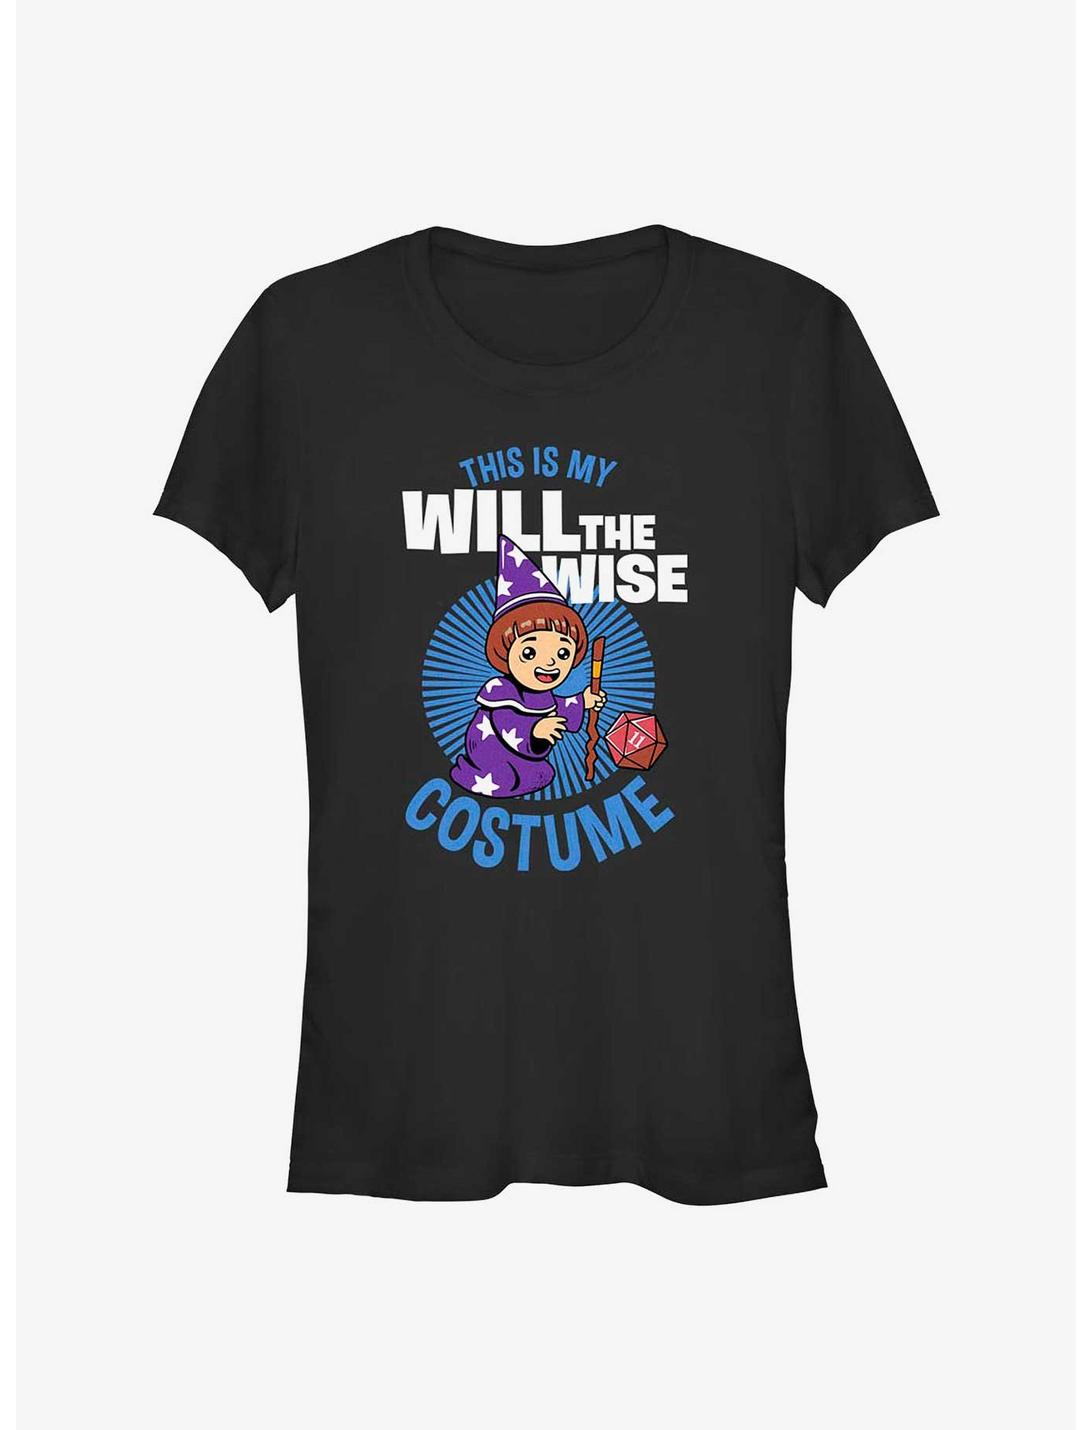 Stranger Things This Is My Will The Wise Costume Girls T-Shirt, BLACK, hi-res